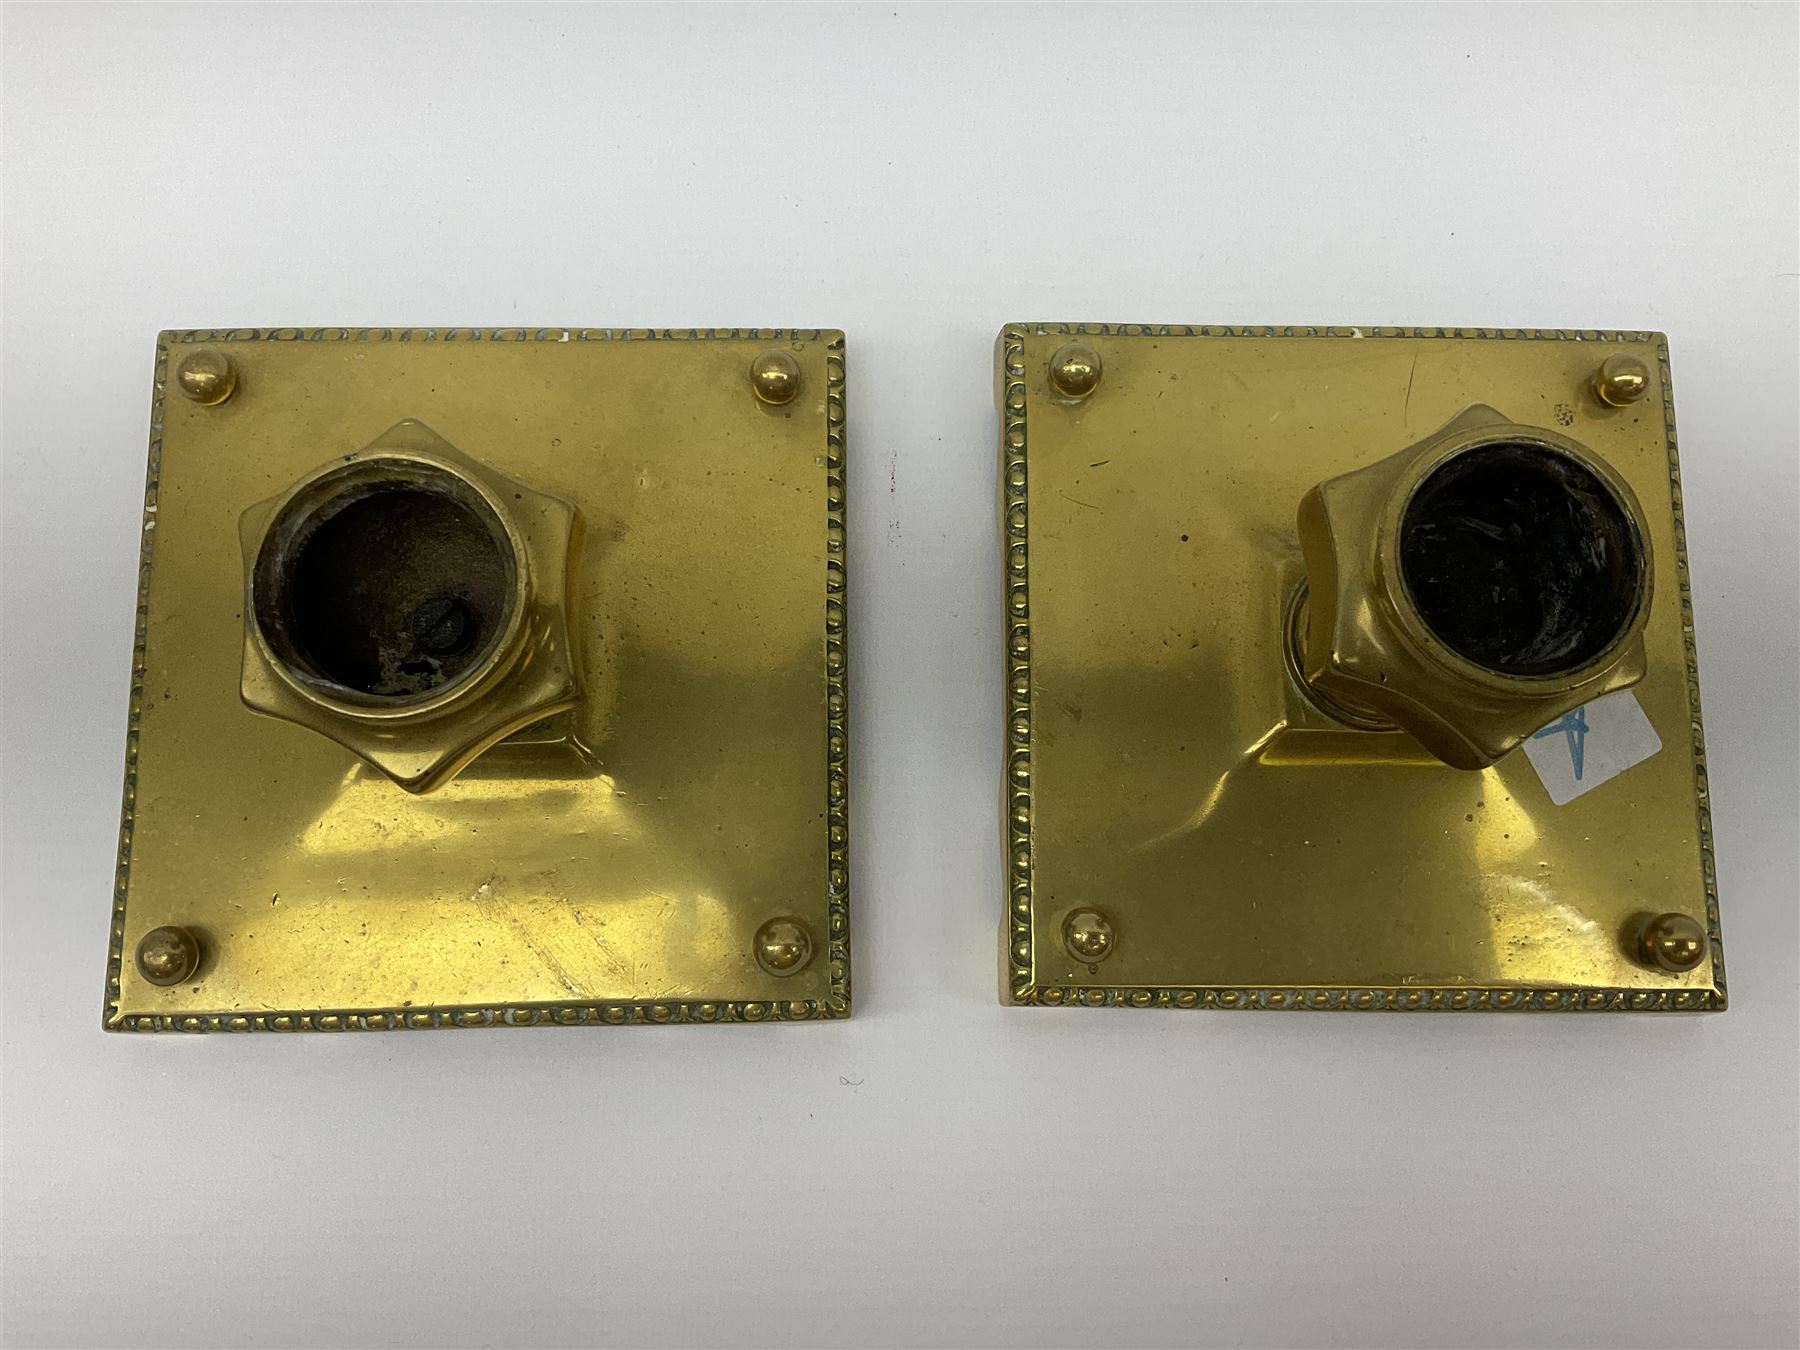 Pair of brass candlesticks - Image 2 of 4